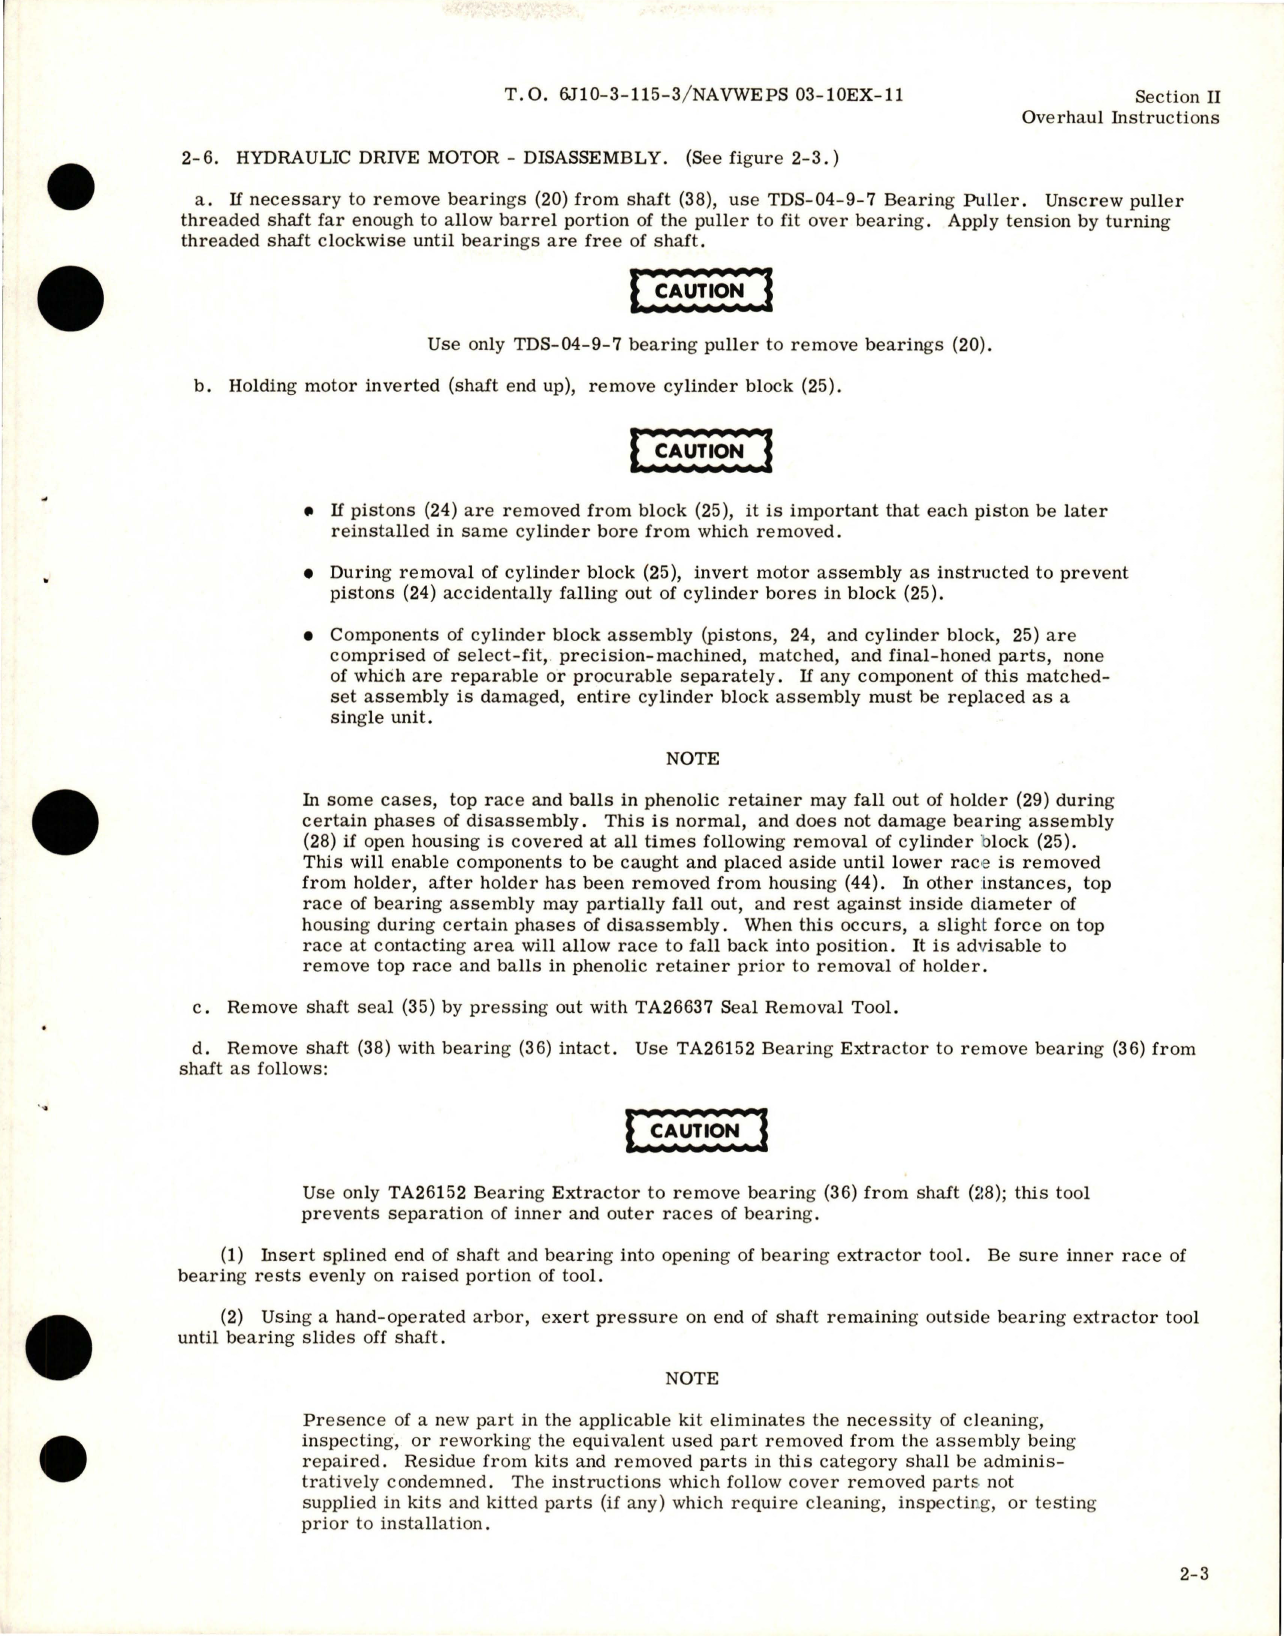 Sample page 9 from AirCorps Library document: Overhaul for Fuel Transfer Pump Assembly 